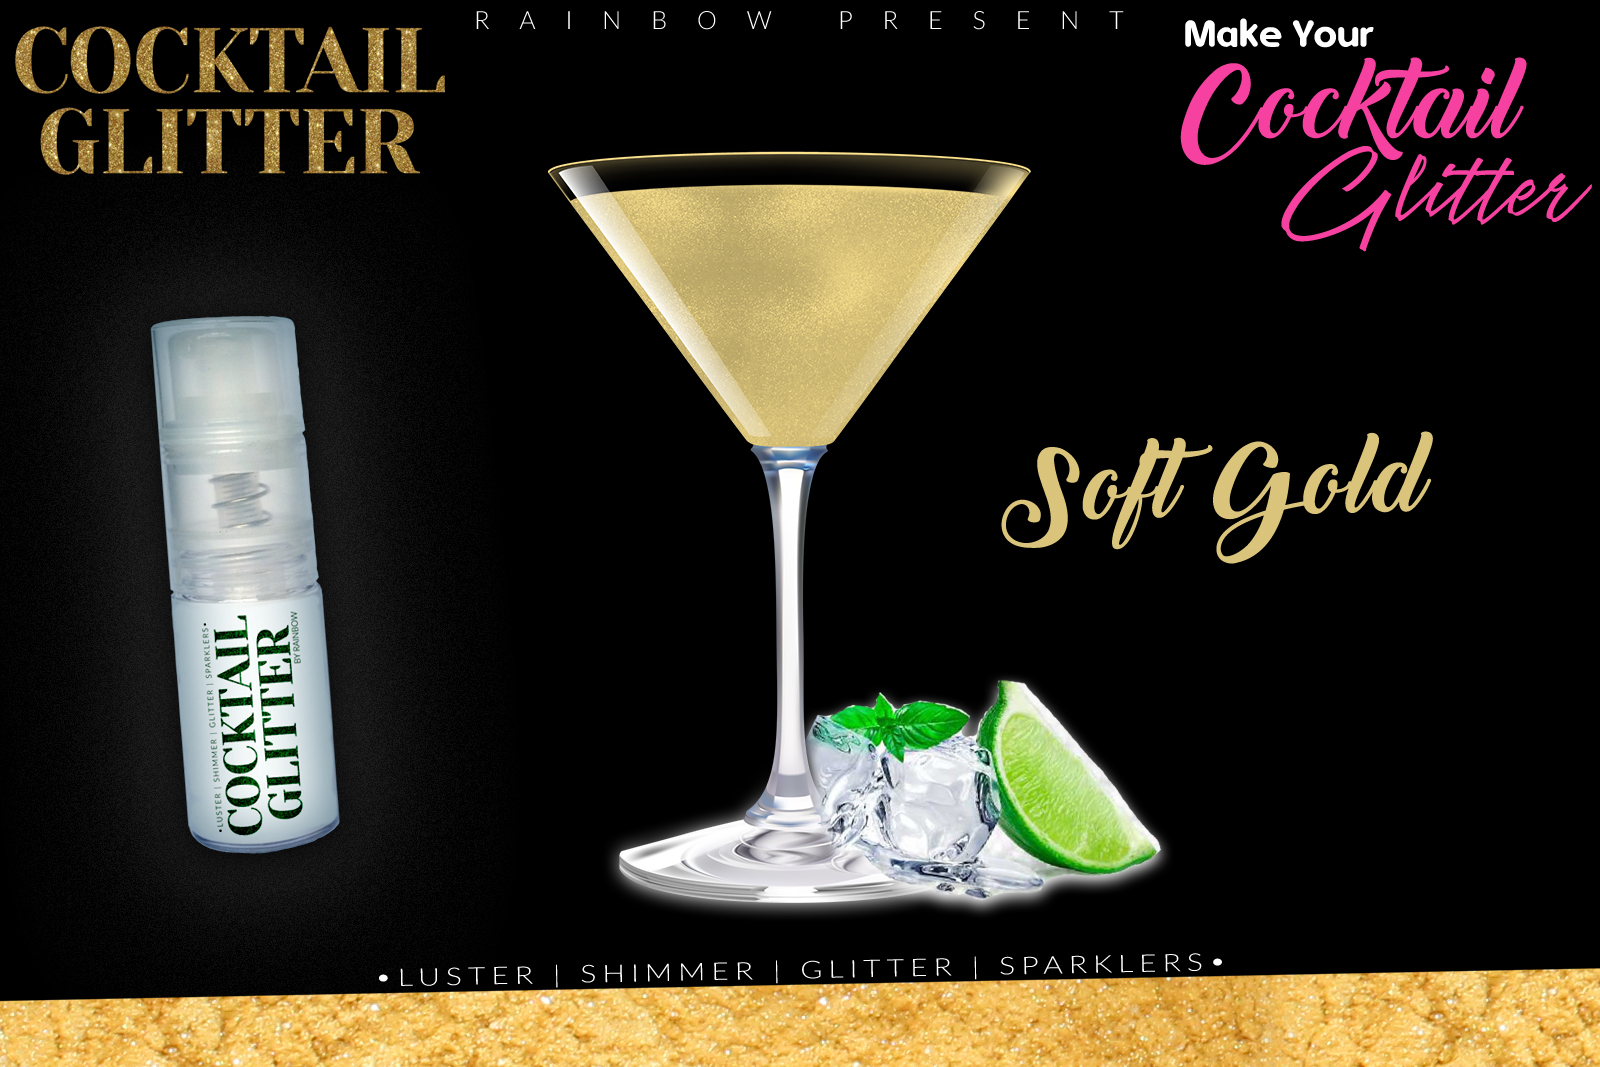 Glitzy Cocktail Glitter and Sparkling Effect | Edible | Soft Gold